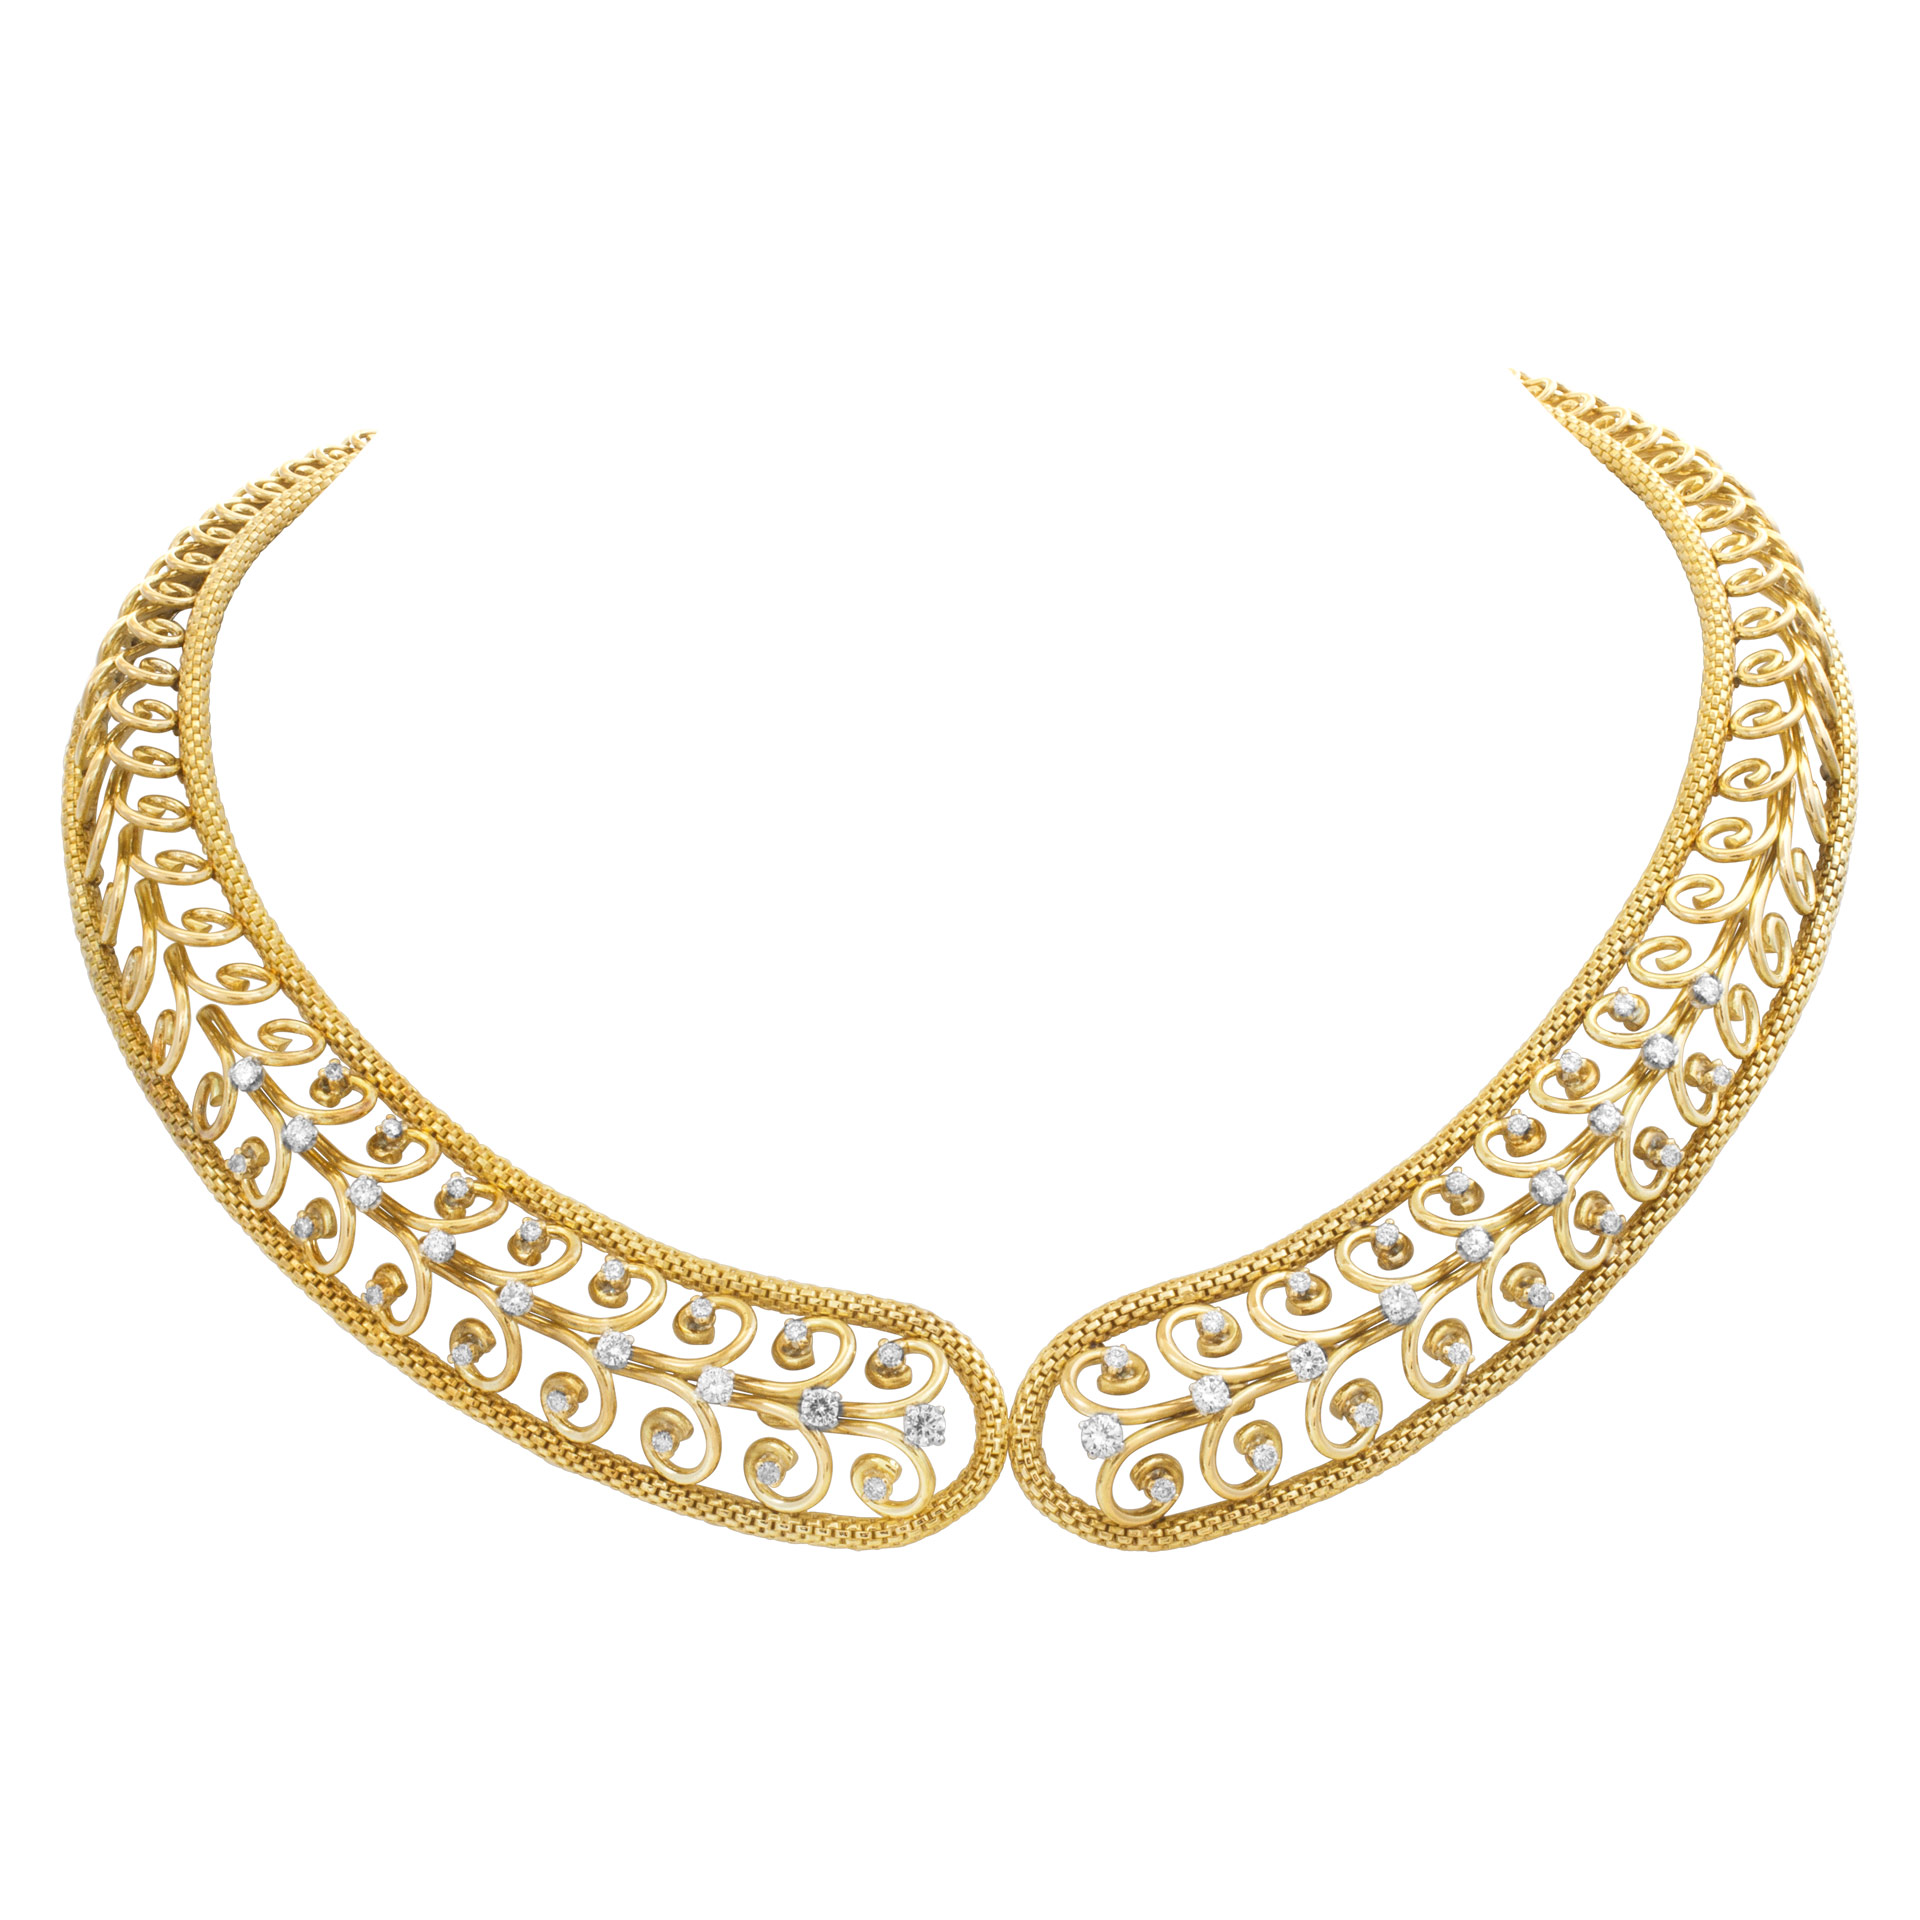 Swirl link choker necklace with diamond accents in 18k (Stones) image 3